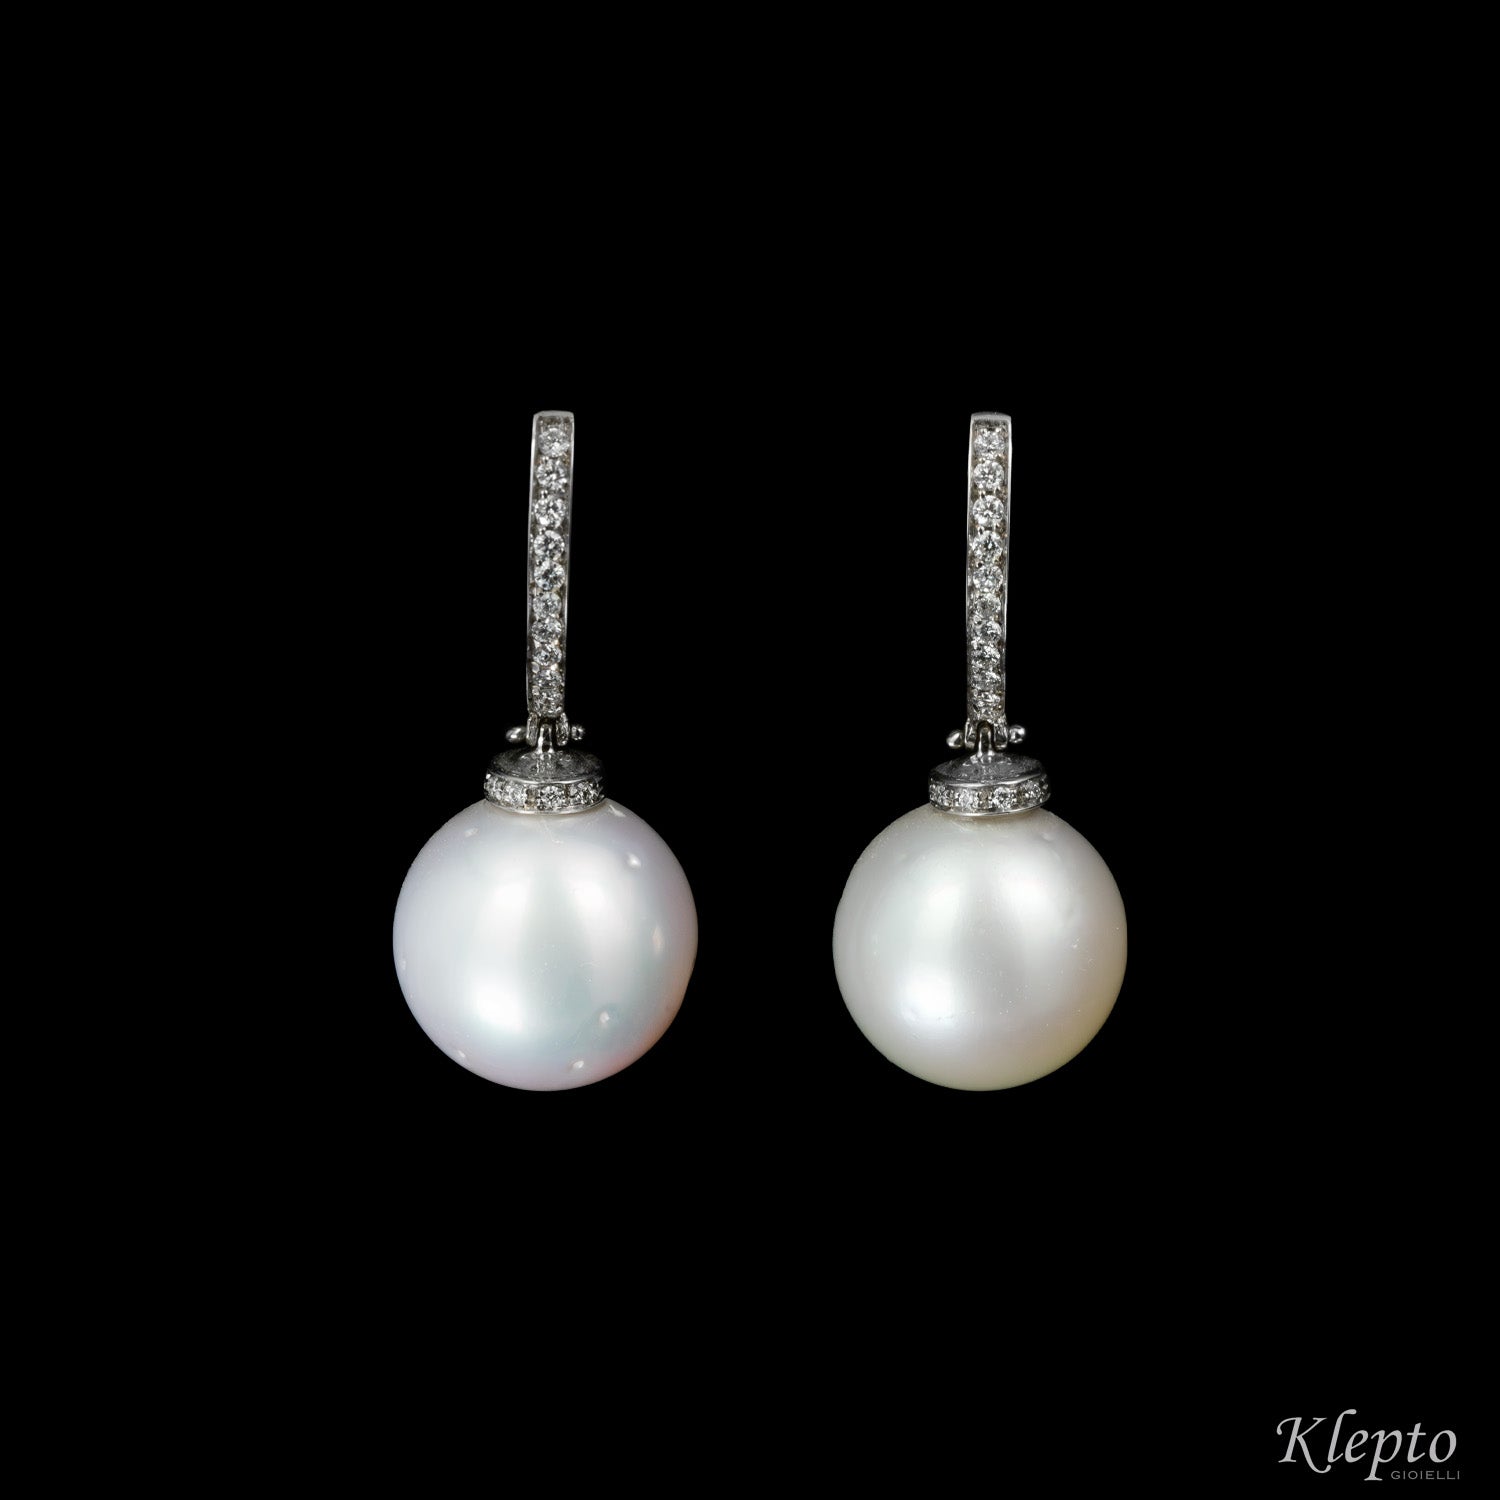 White gold pendant earrings with Australian Pearls and Diamonds